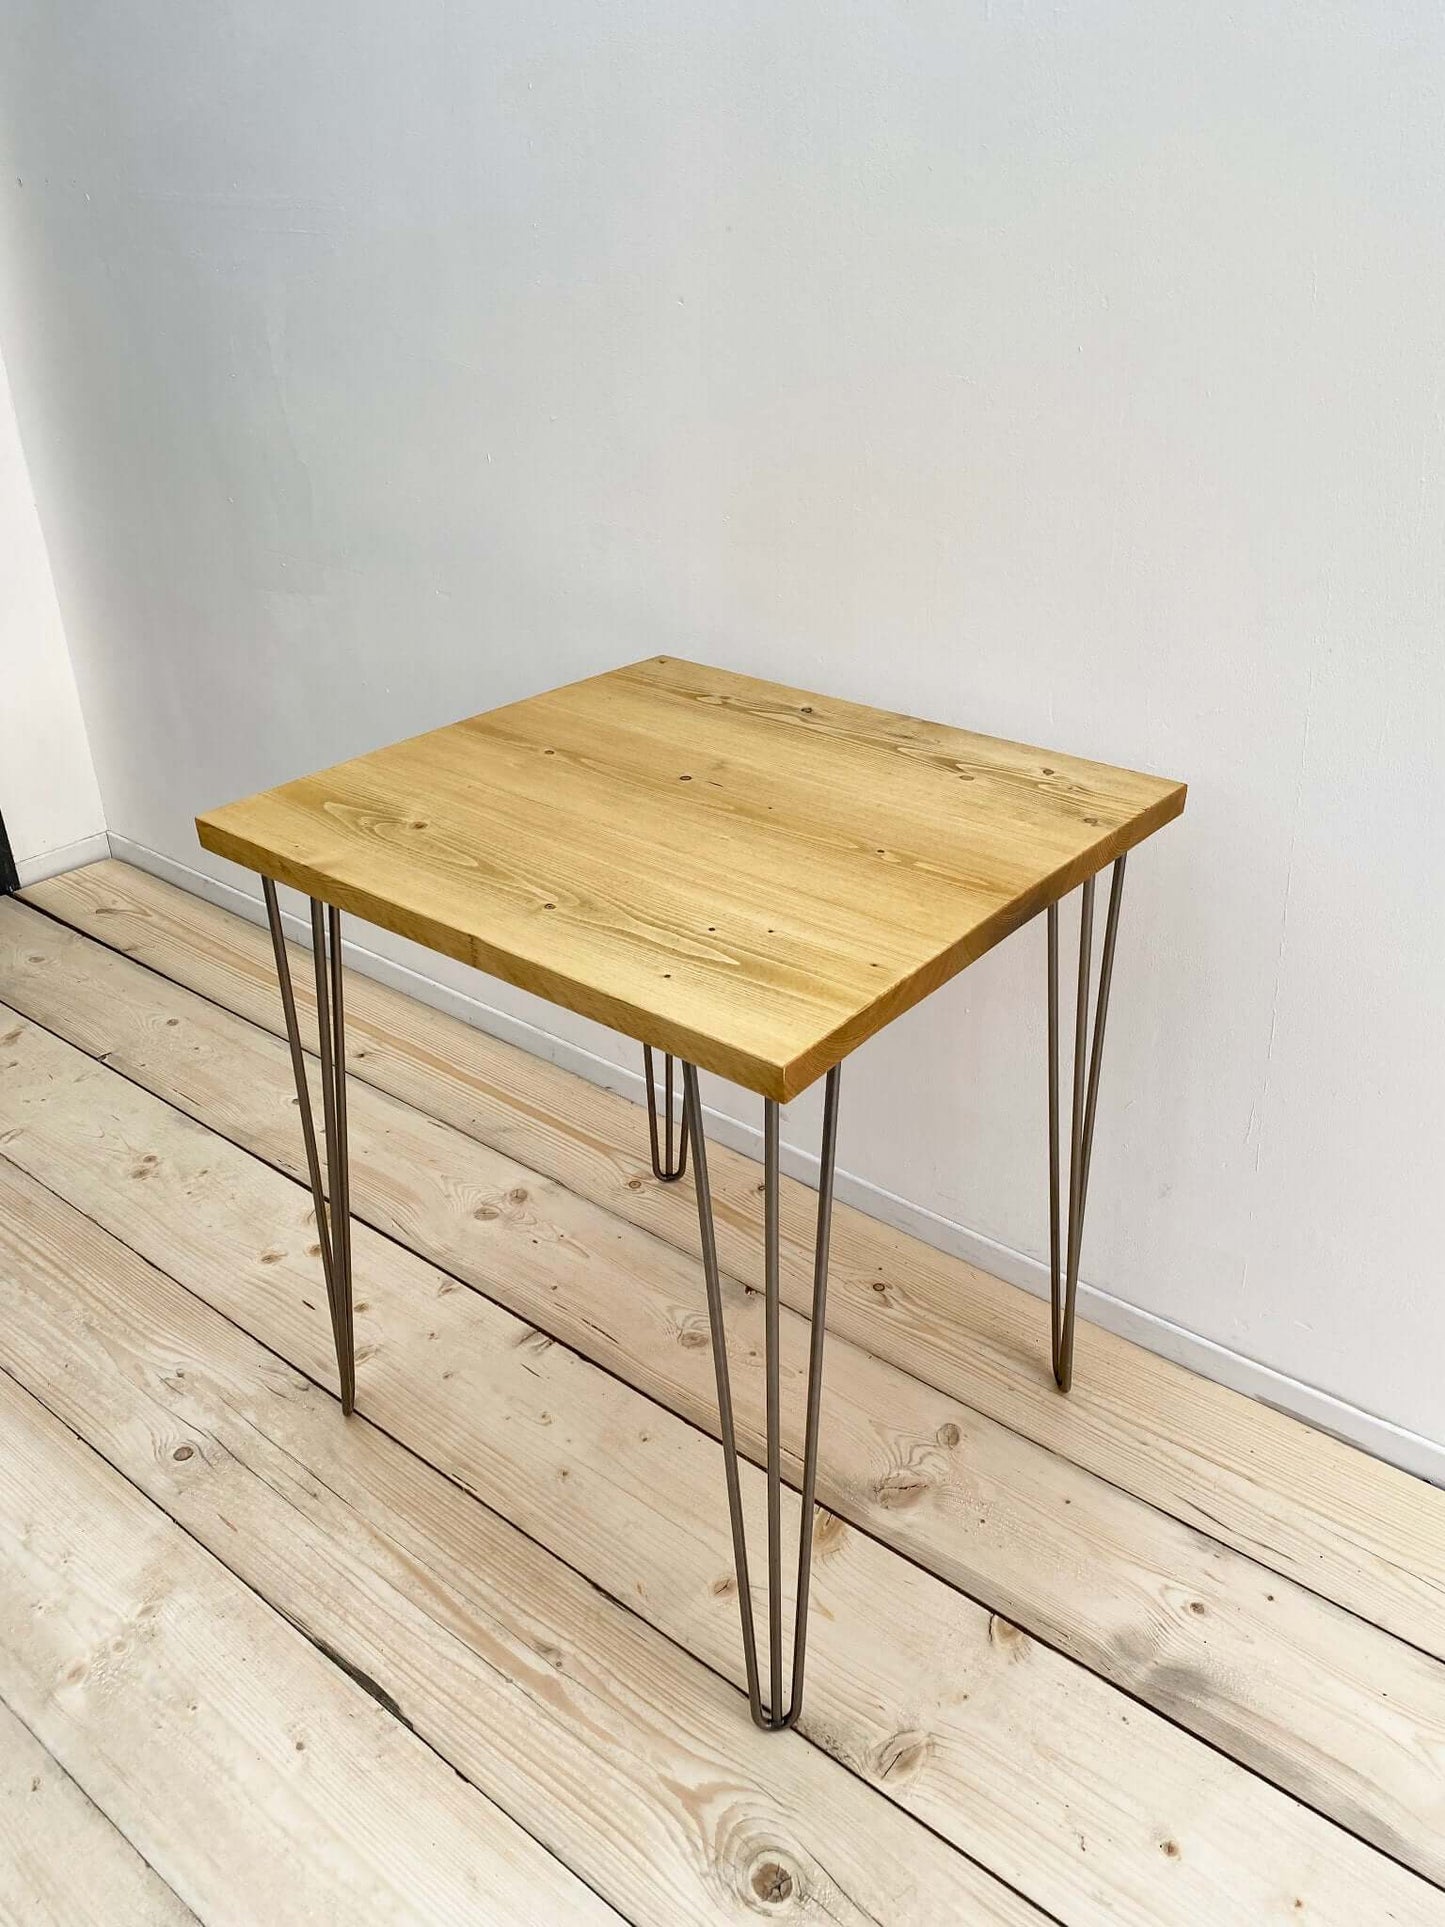 Reclaimed wood small dining table with hairpin legs.